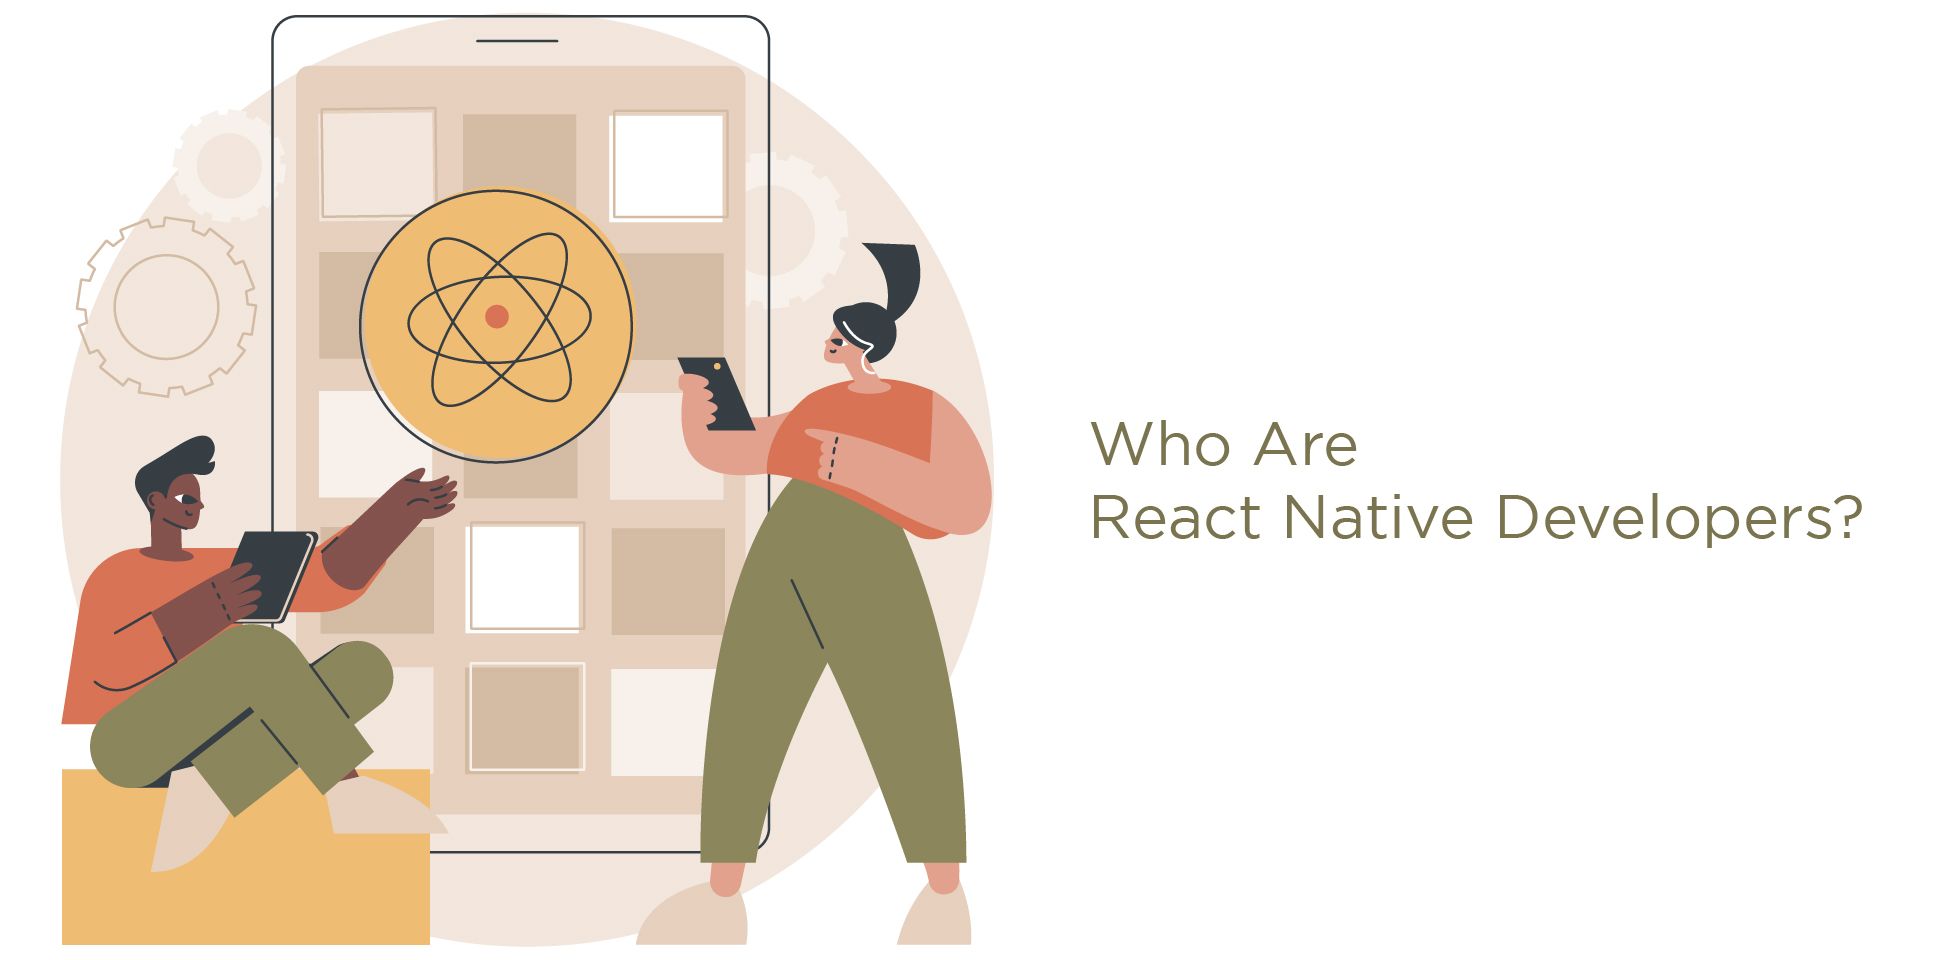 Who Are React Native Developers?